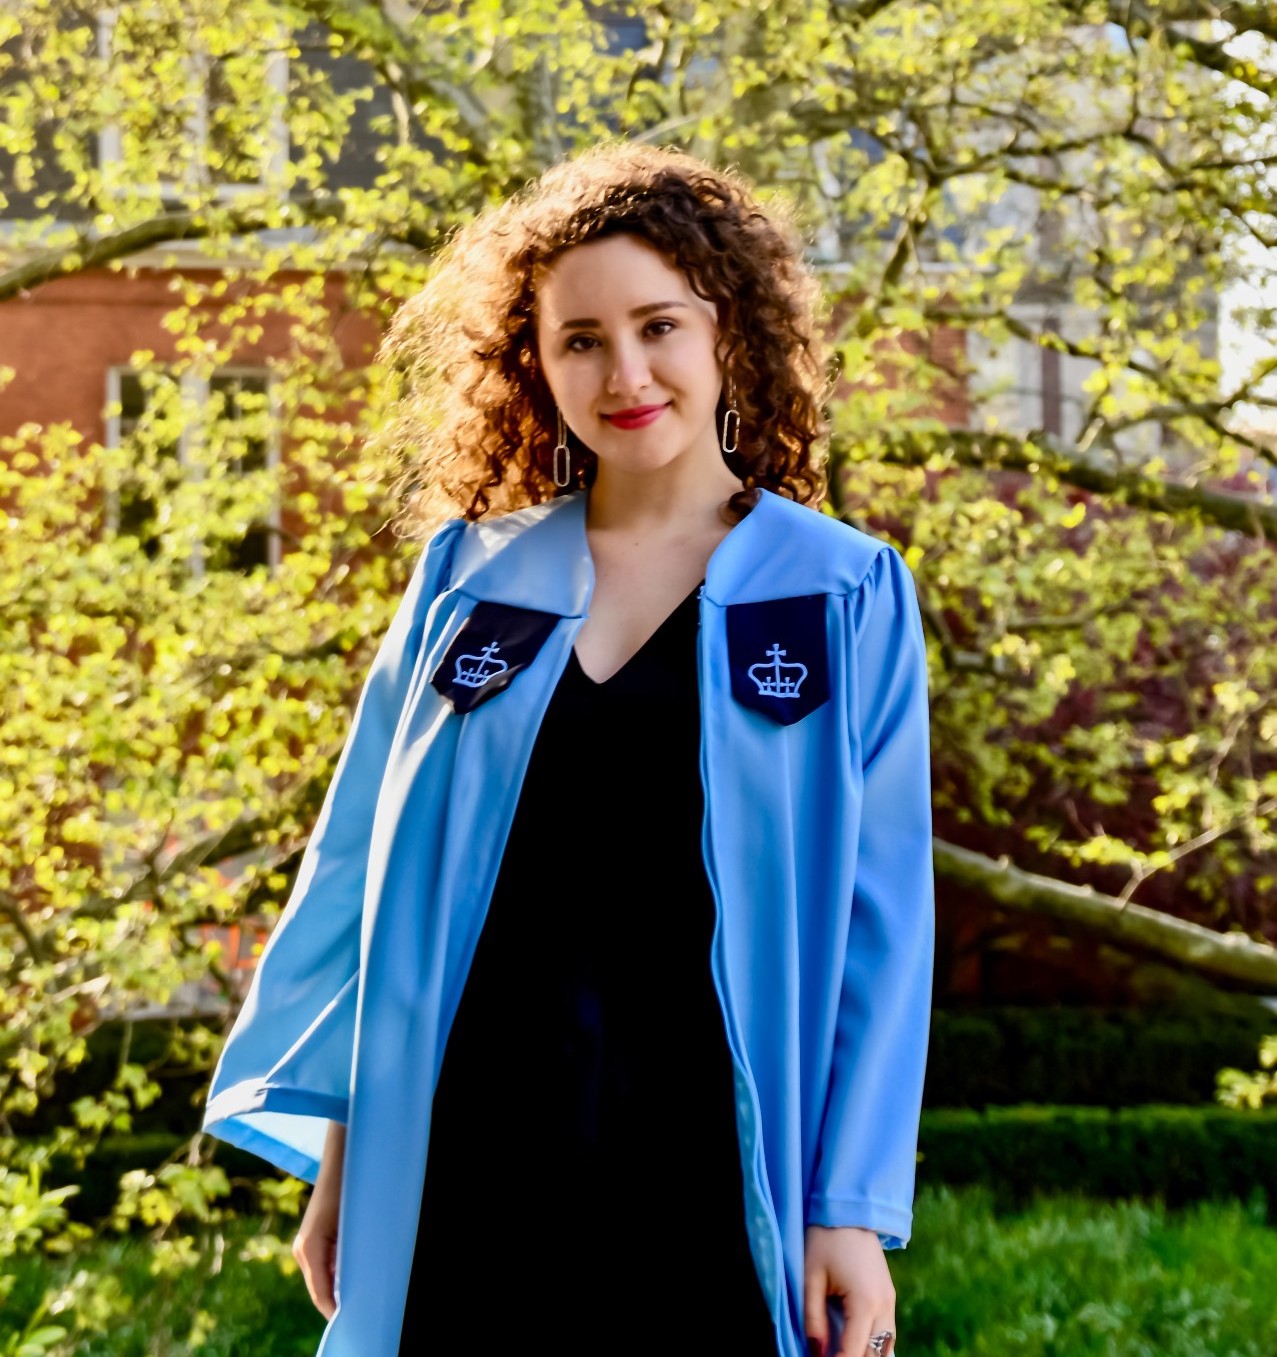 Alexandra Boubour wears a Columbia graduation gown in front of a flowering yellow tree